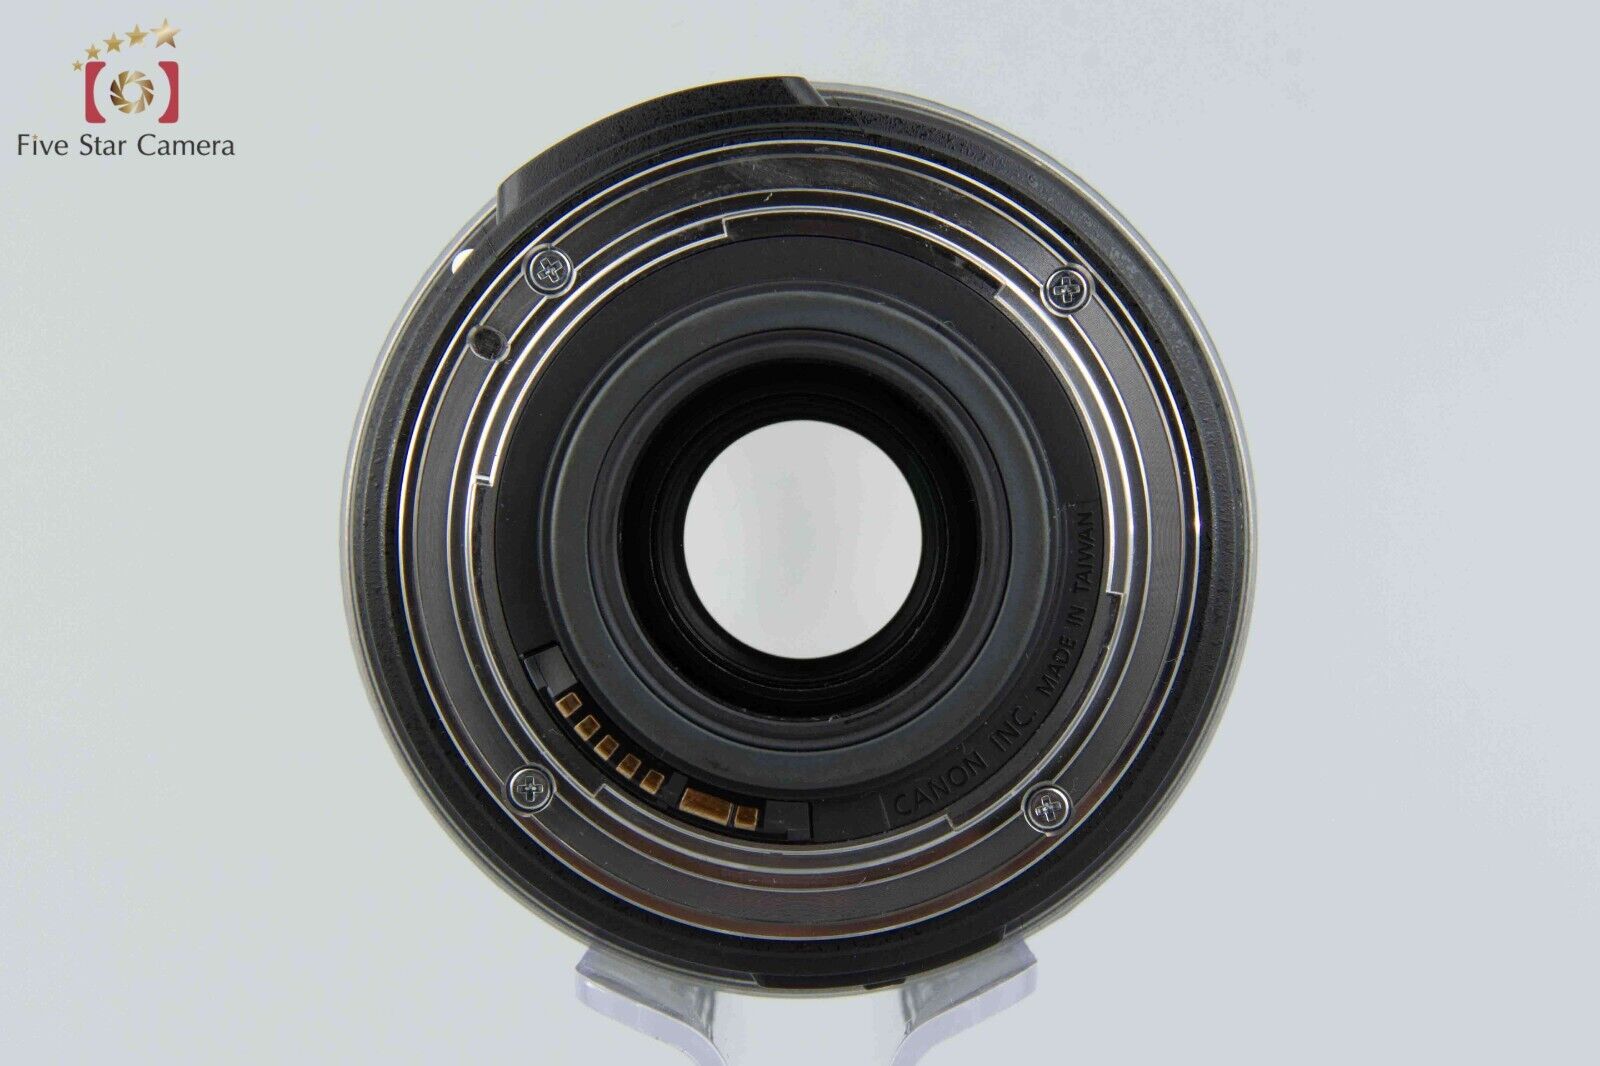 Very Good!! Canon EF-S 18-200mm f/3.5-5.6 IS